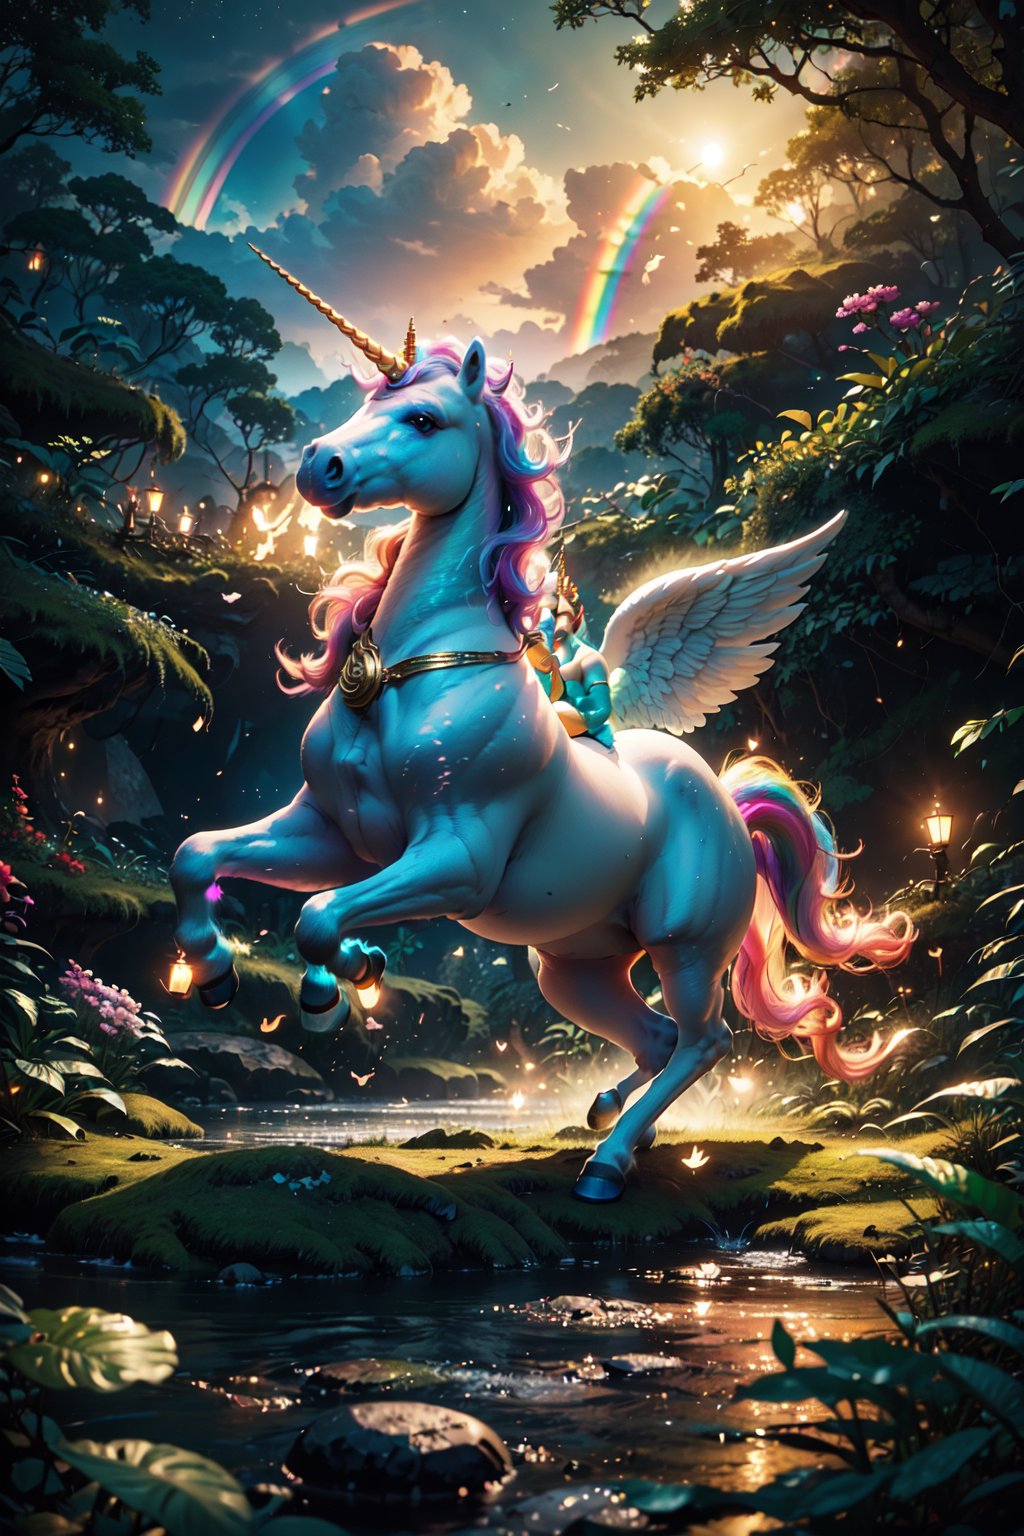 score_9, score_8_up, score_7_up, score_6_up, 
(Full body:1.5), (Unicorn, Rainbow Unicorn, Unicorn horn, Angel wings:1.5), Magic Forest, Night sky, moon, fireflies, waterfalls, (Masterpiece, Best Quality, 8k:1.2), (Ultra-Detailed, Highres, Extremely Detailed, Absurdres, Incredibly Absurdres, Huge Filesize:1.1), (Photorealistic:1.3), By Futurevolab, Portrait, Ultra-Realistic Illustration, Digital Painting.,Rainbow Unicorn